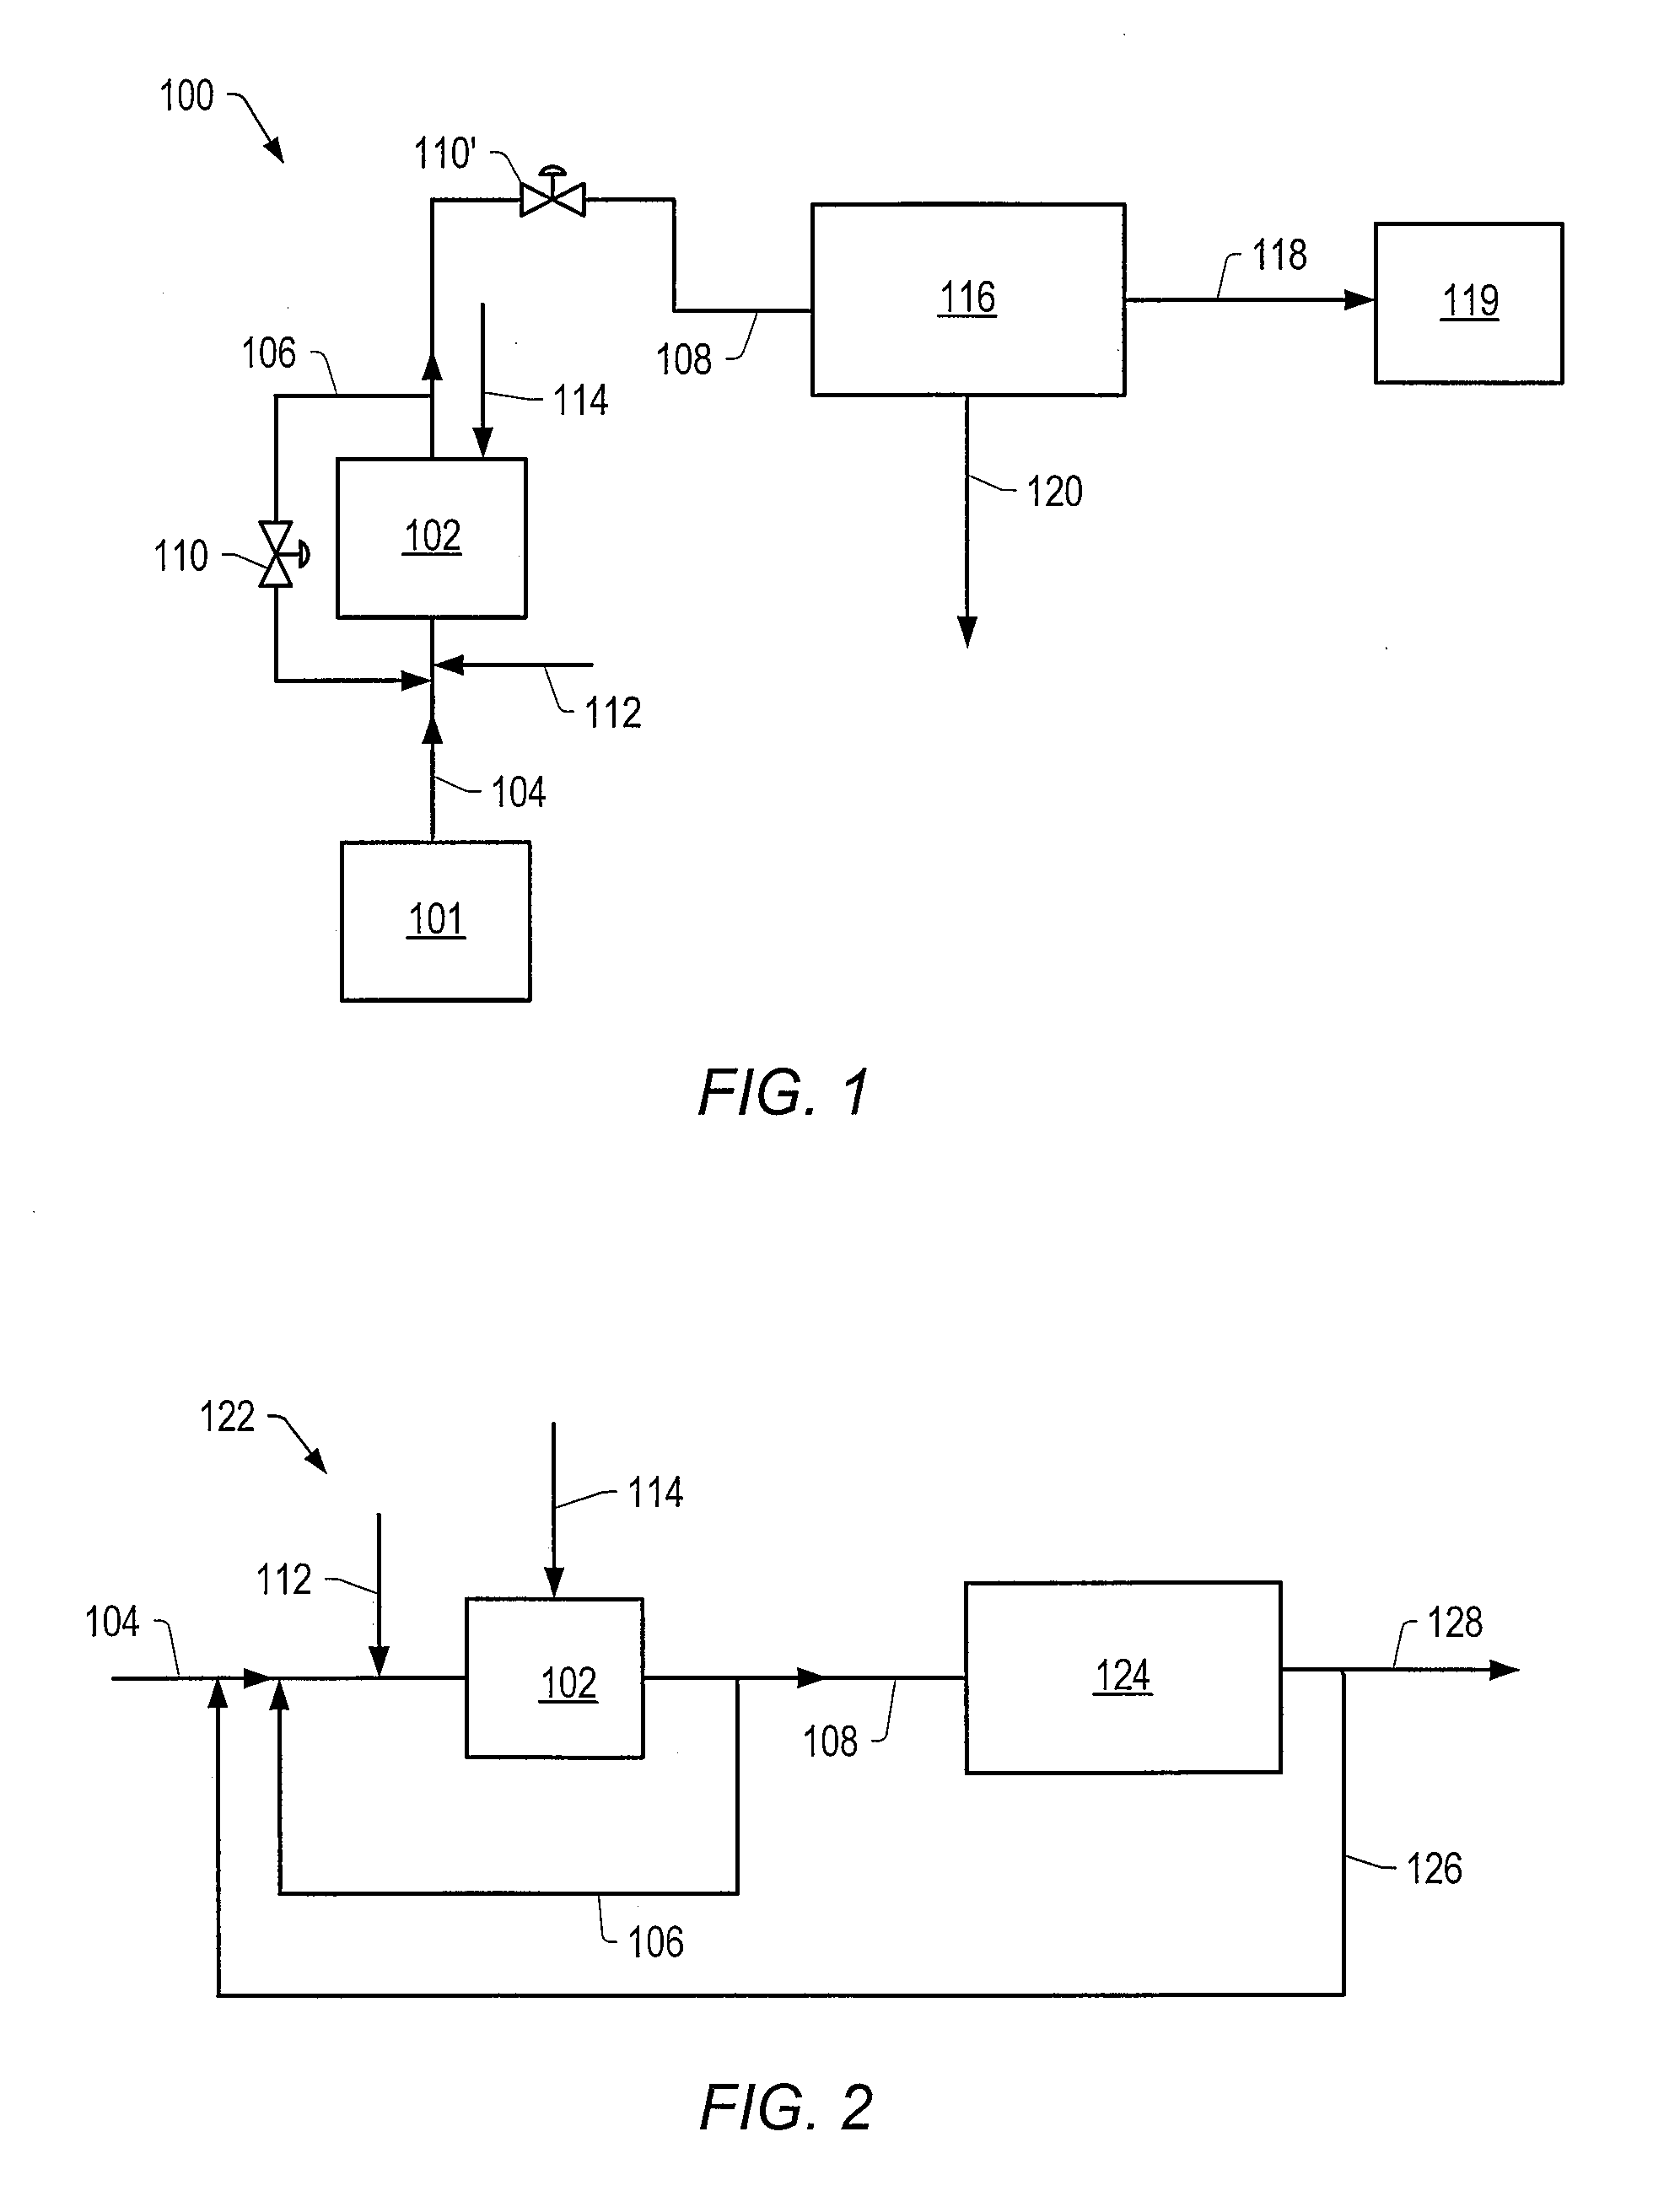 Methods for producing a total product in the presence of sulfur